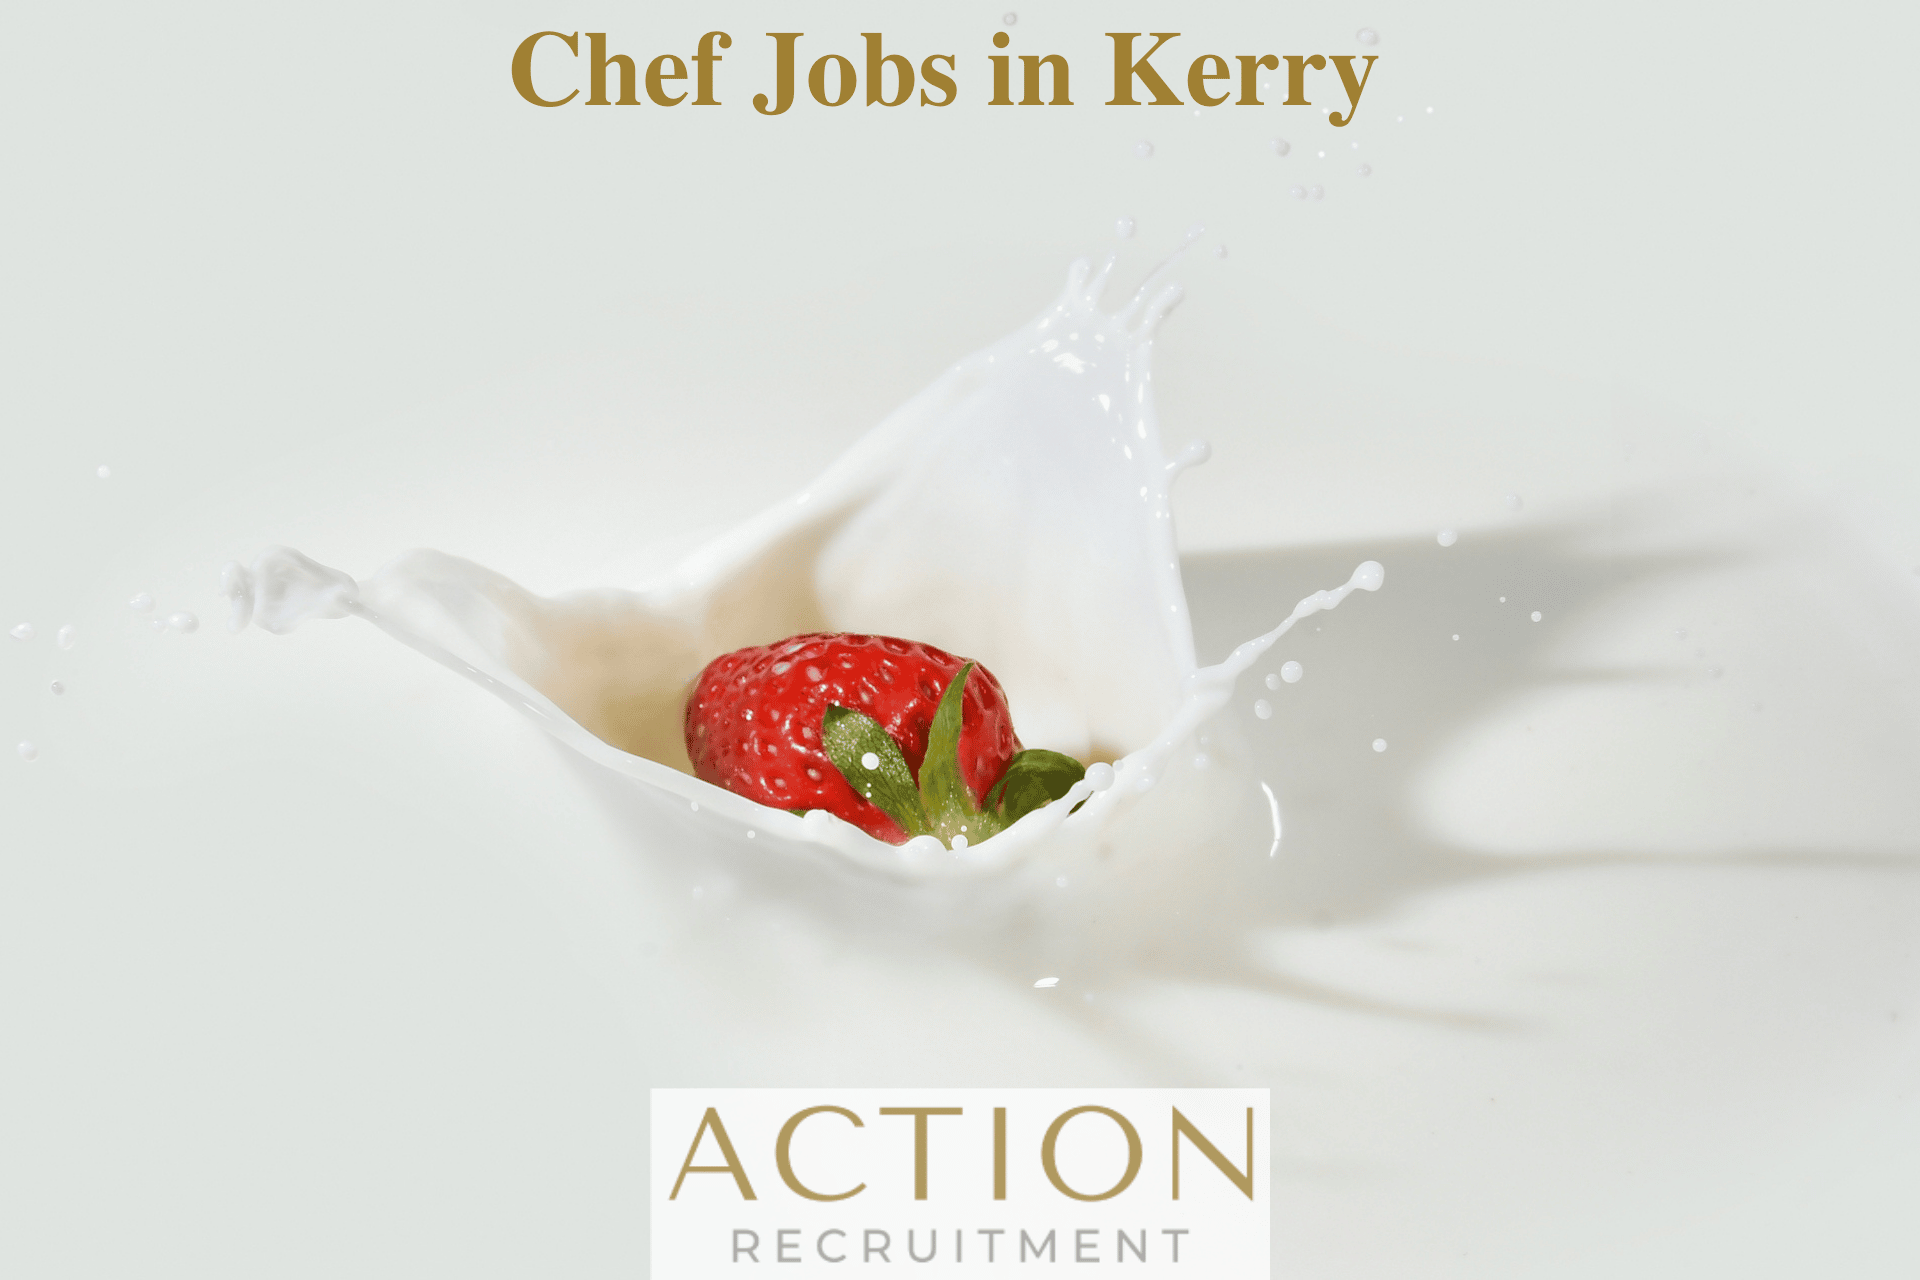 Chef Jobs in Kerry